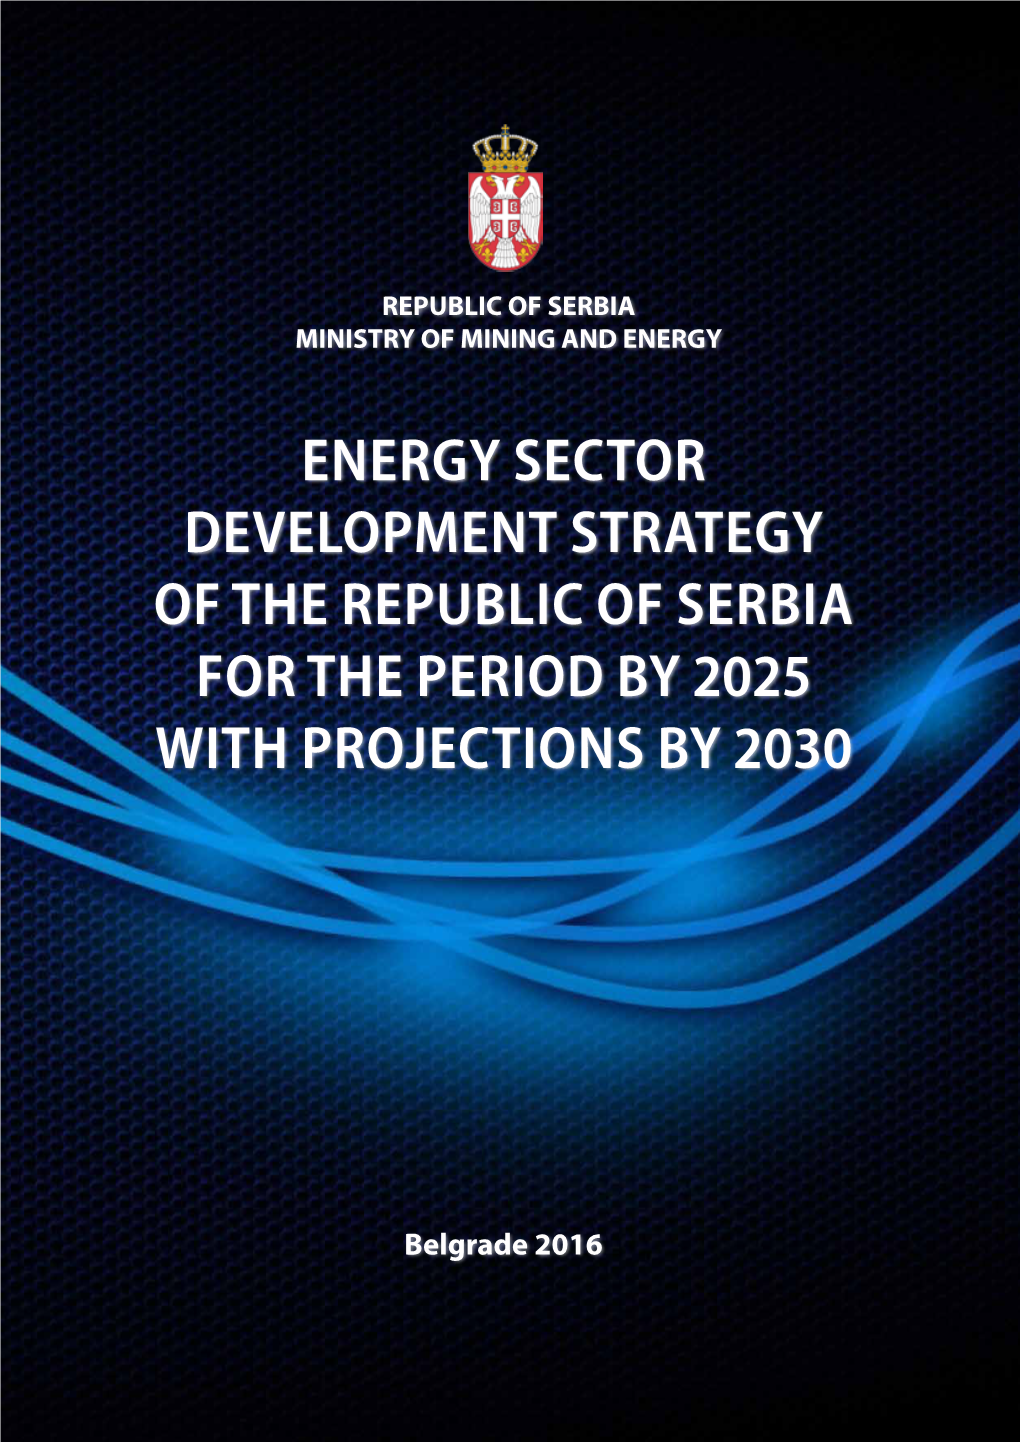 Energy Sector Development Strategy of the Republic of Serbia for the Period by 2025 with Projections by 2030